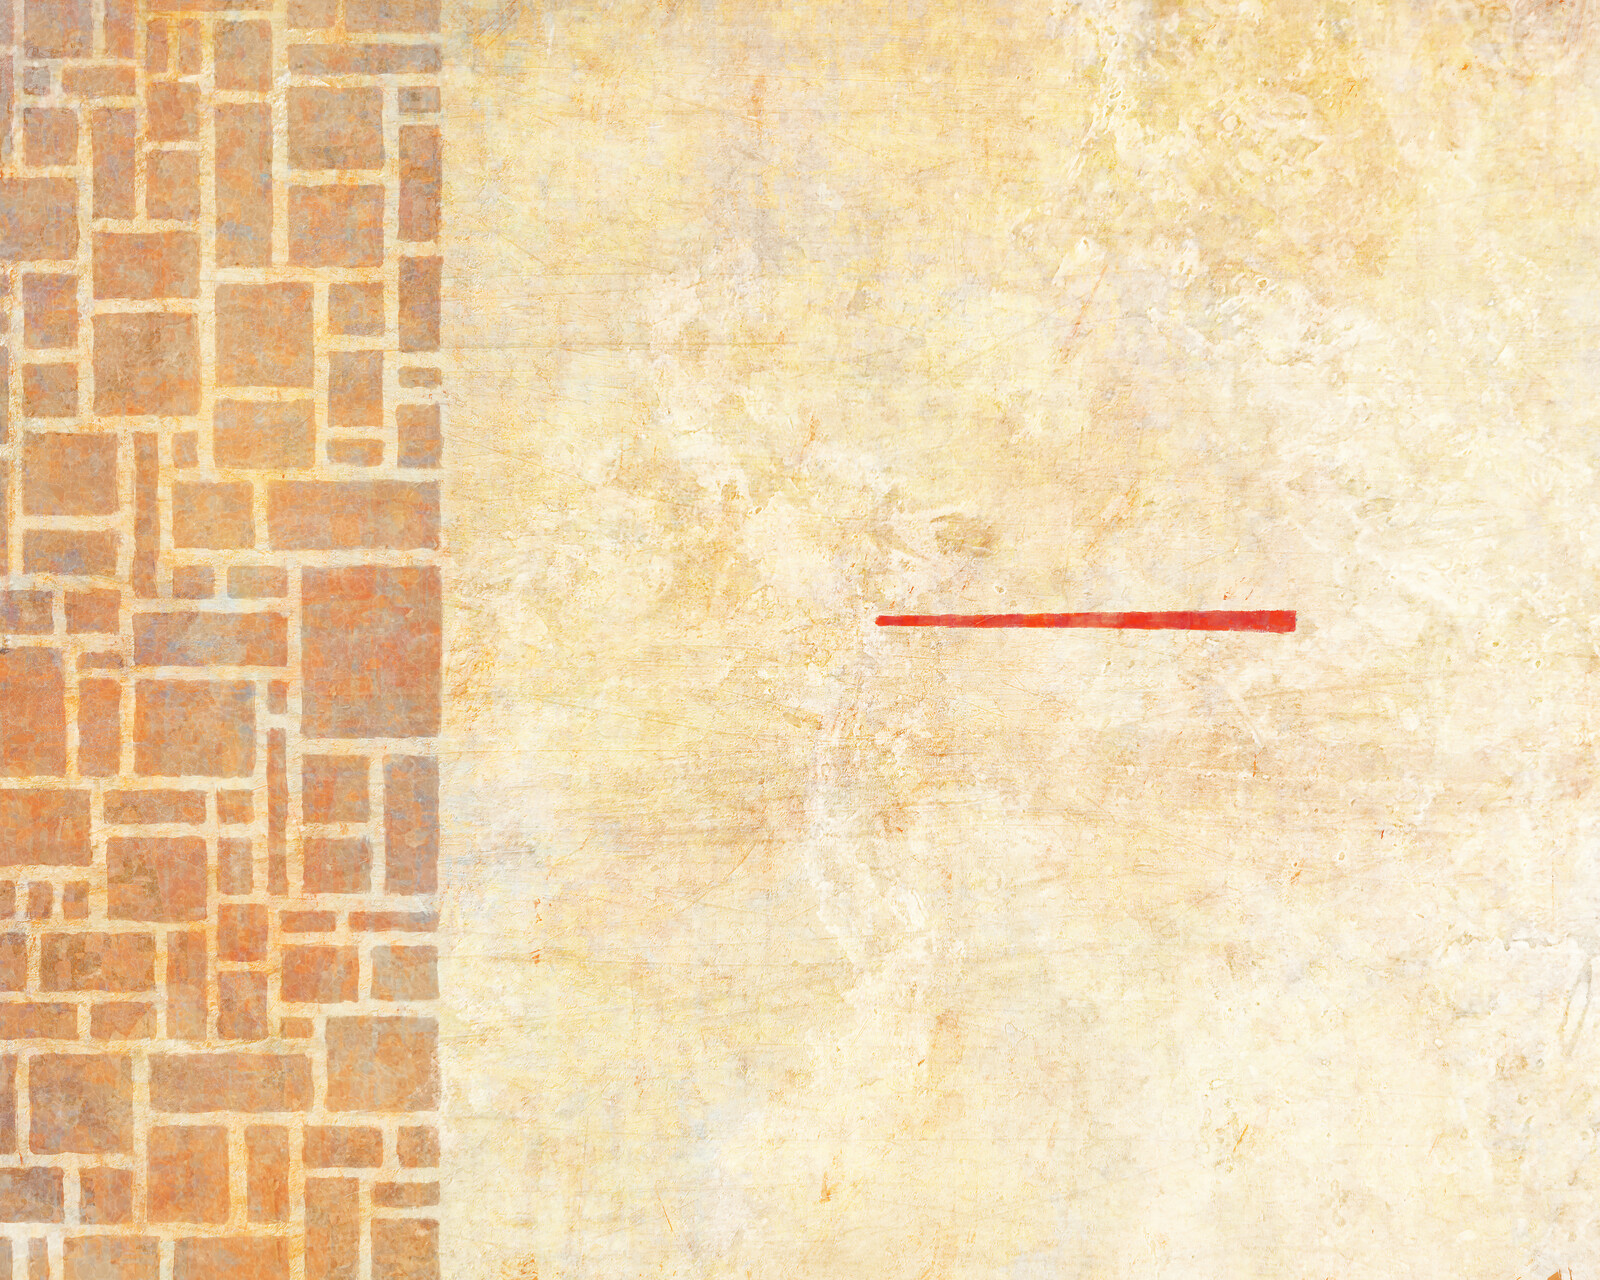 A grid of uneven brown rectangles at left; a horizontal red line at right.